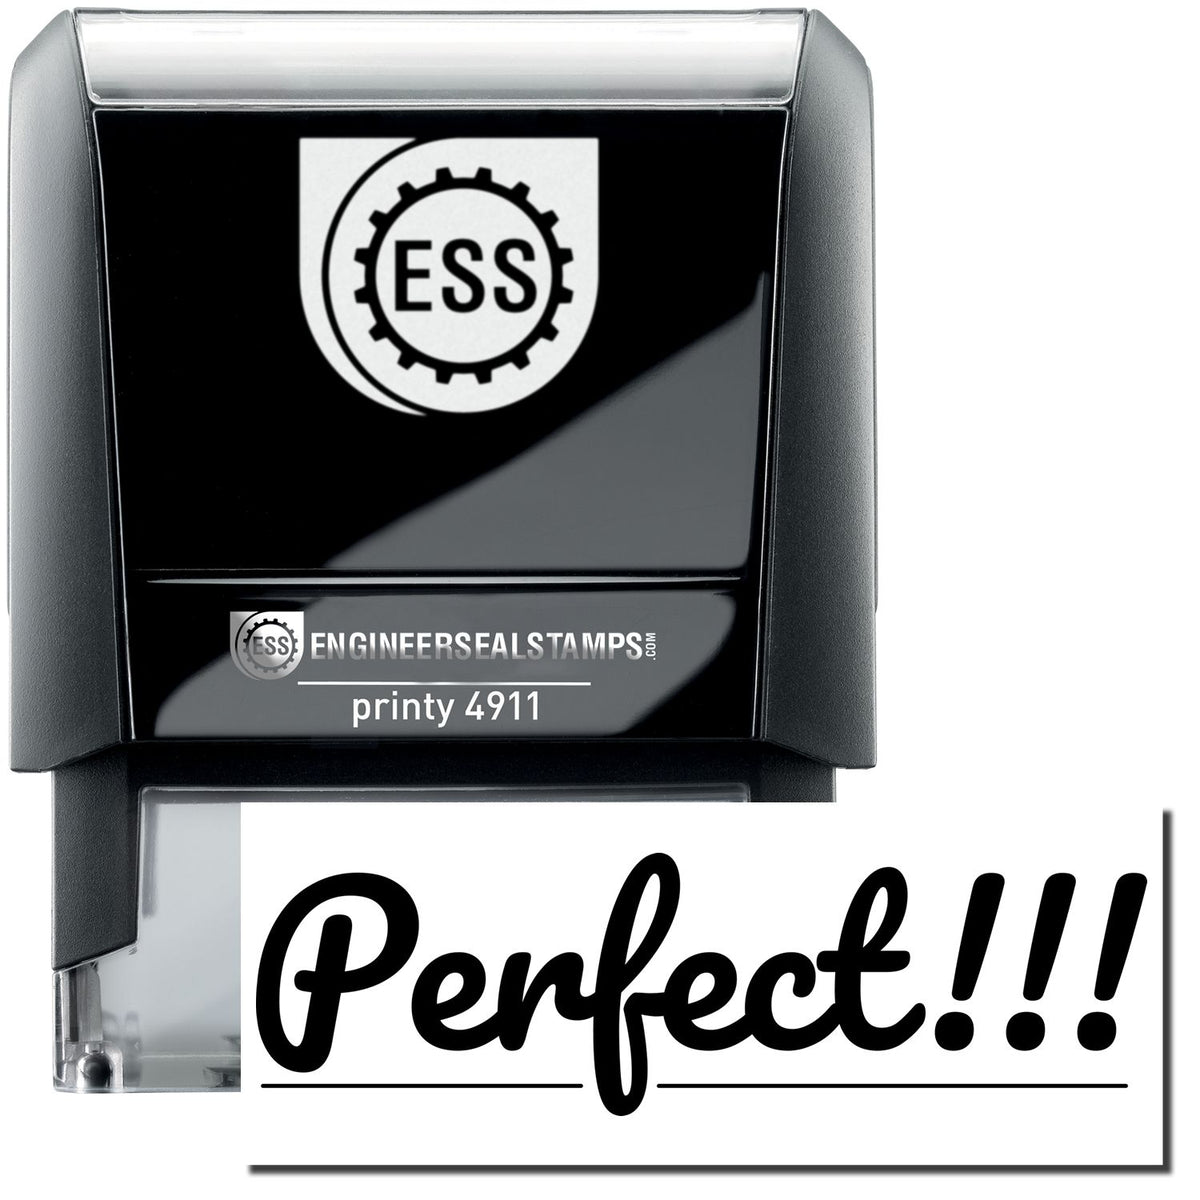 A self-inking stamp with a stamped image showing how the word &quot;Perfect!!!&quot; (in a bold font with a line underneath and several exclamation points at the end) is displayed after stamping.